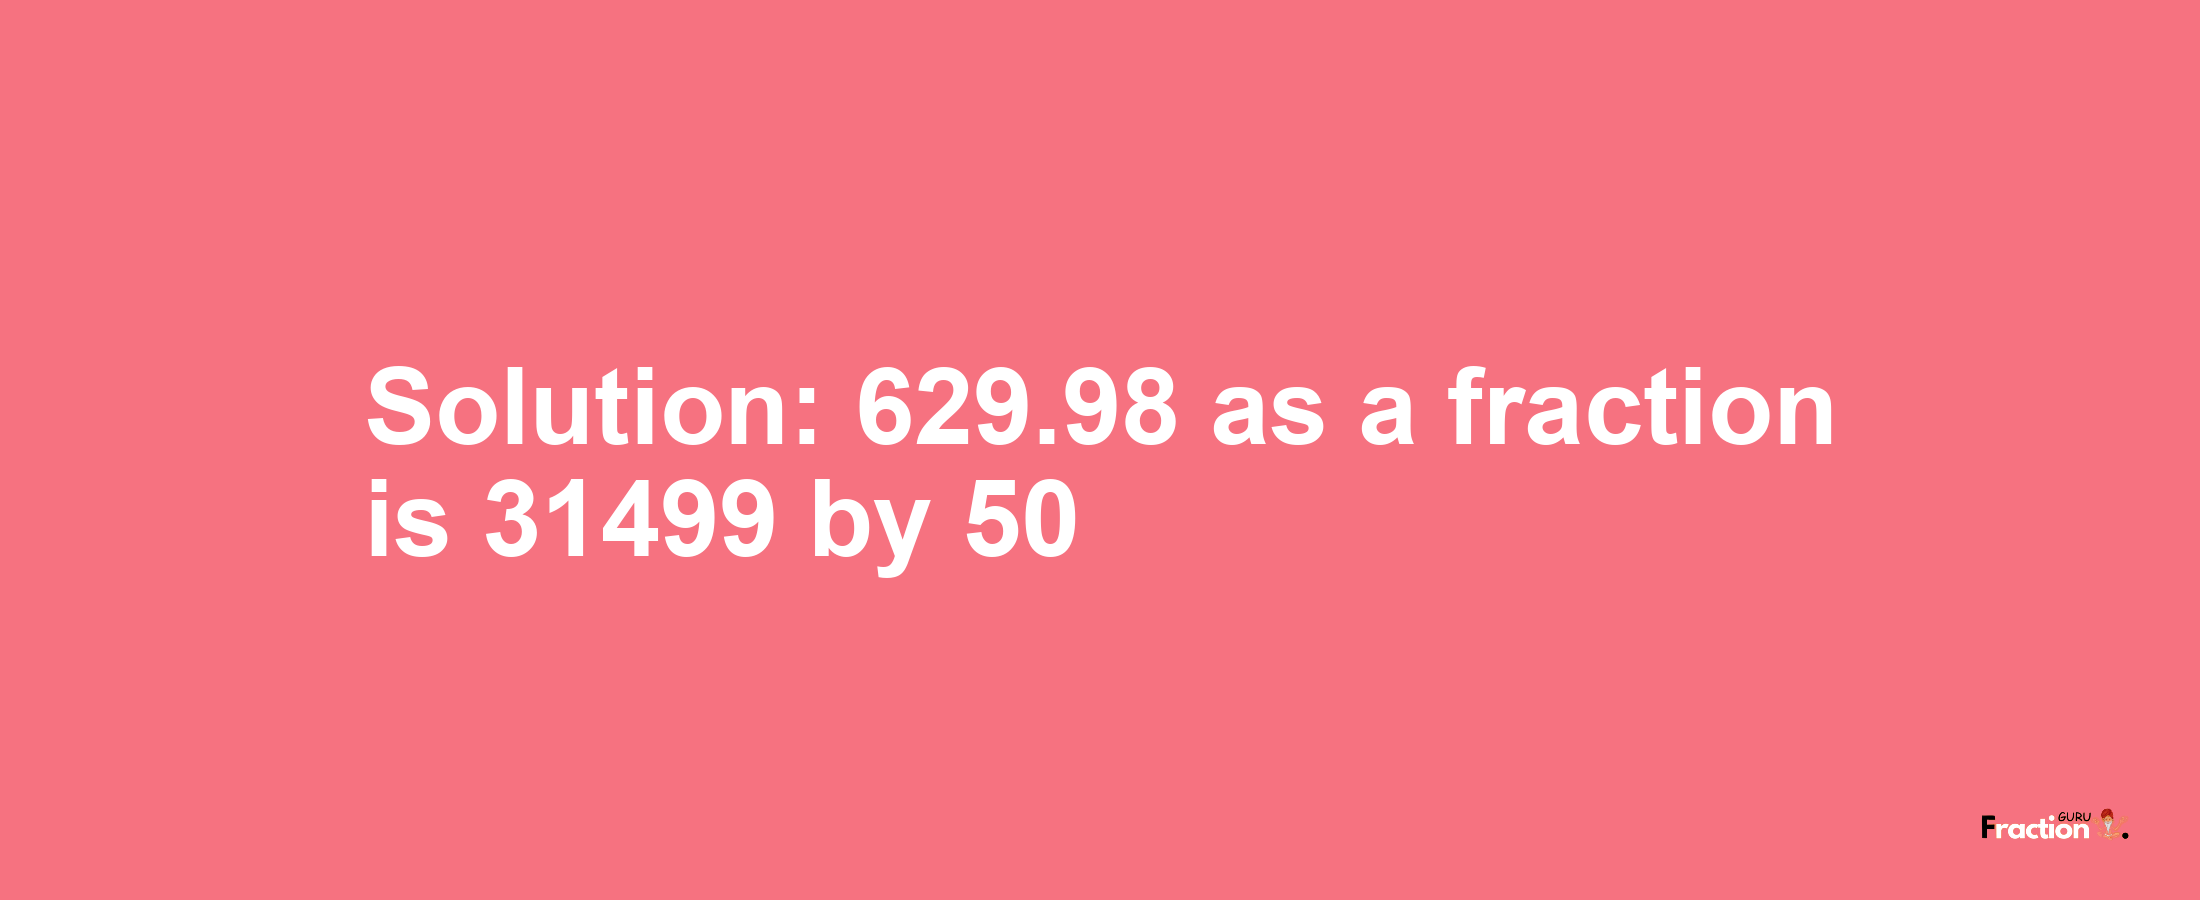 Solution:629.98 as a fraction is 31499/50